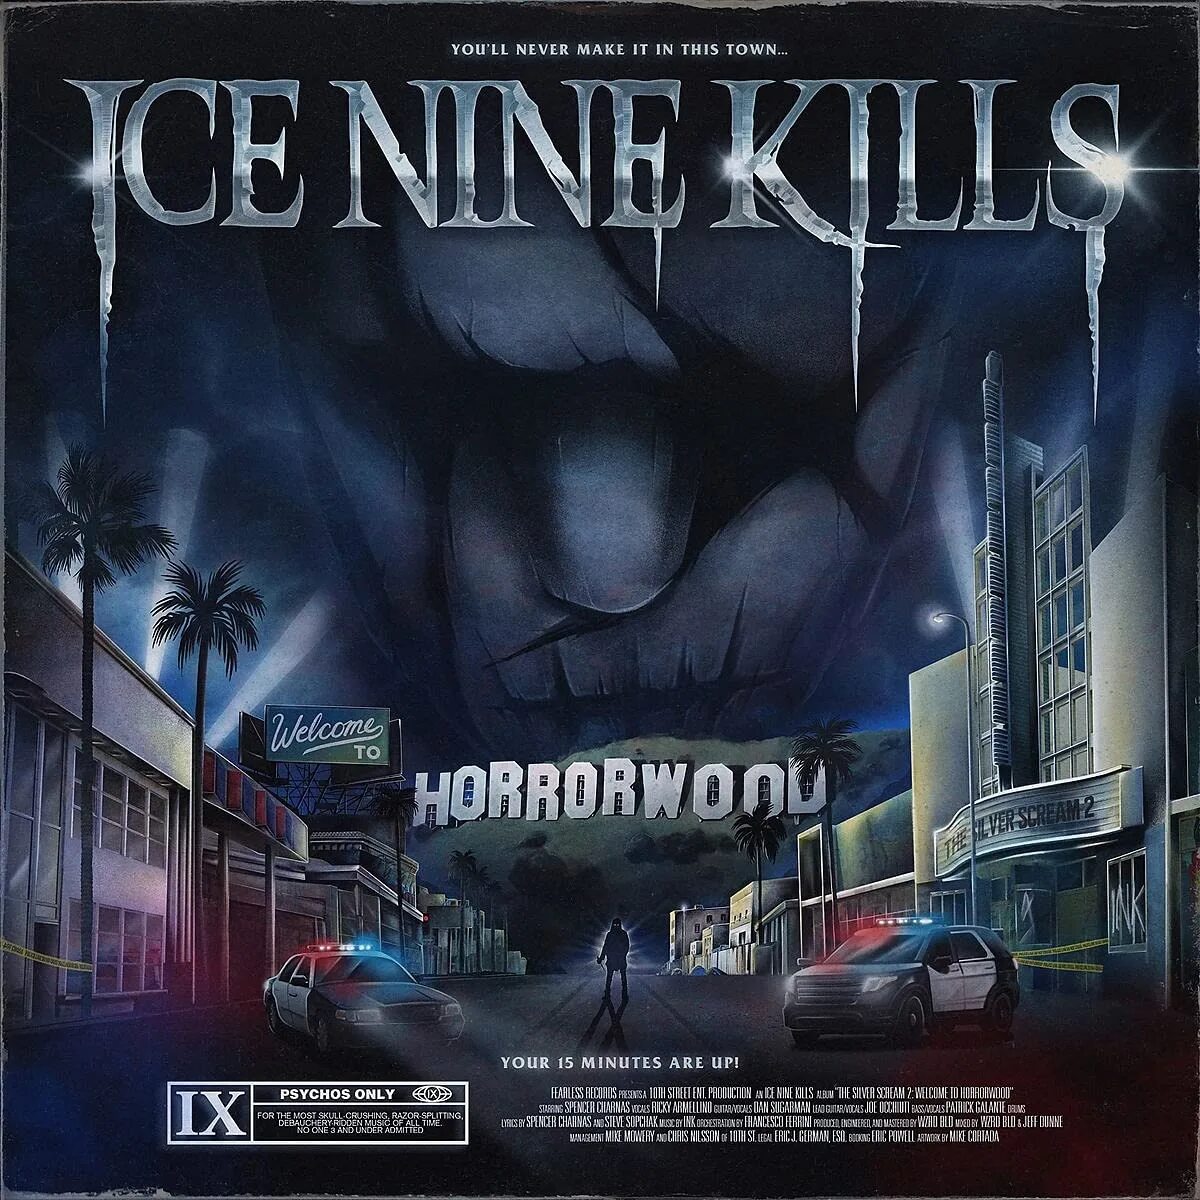 Taken the kill. The Silver Scream 2: Welcome to Horrorwood (2021) Ice Nine Kills. The Silver Scream 2 Welcome to Horrorwood. Ice Nine Kills Welcome to Horror Wood the Silver Scream 2. Ice Nine Kills Welcome to Horrorwood.